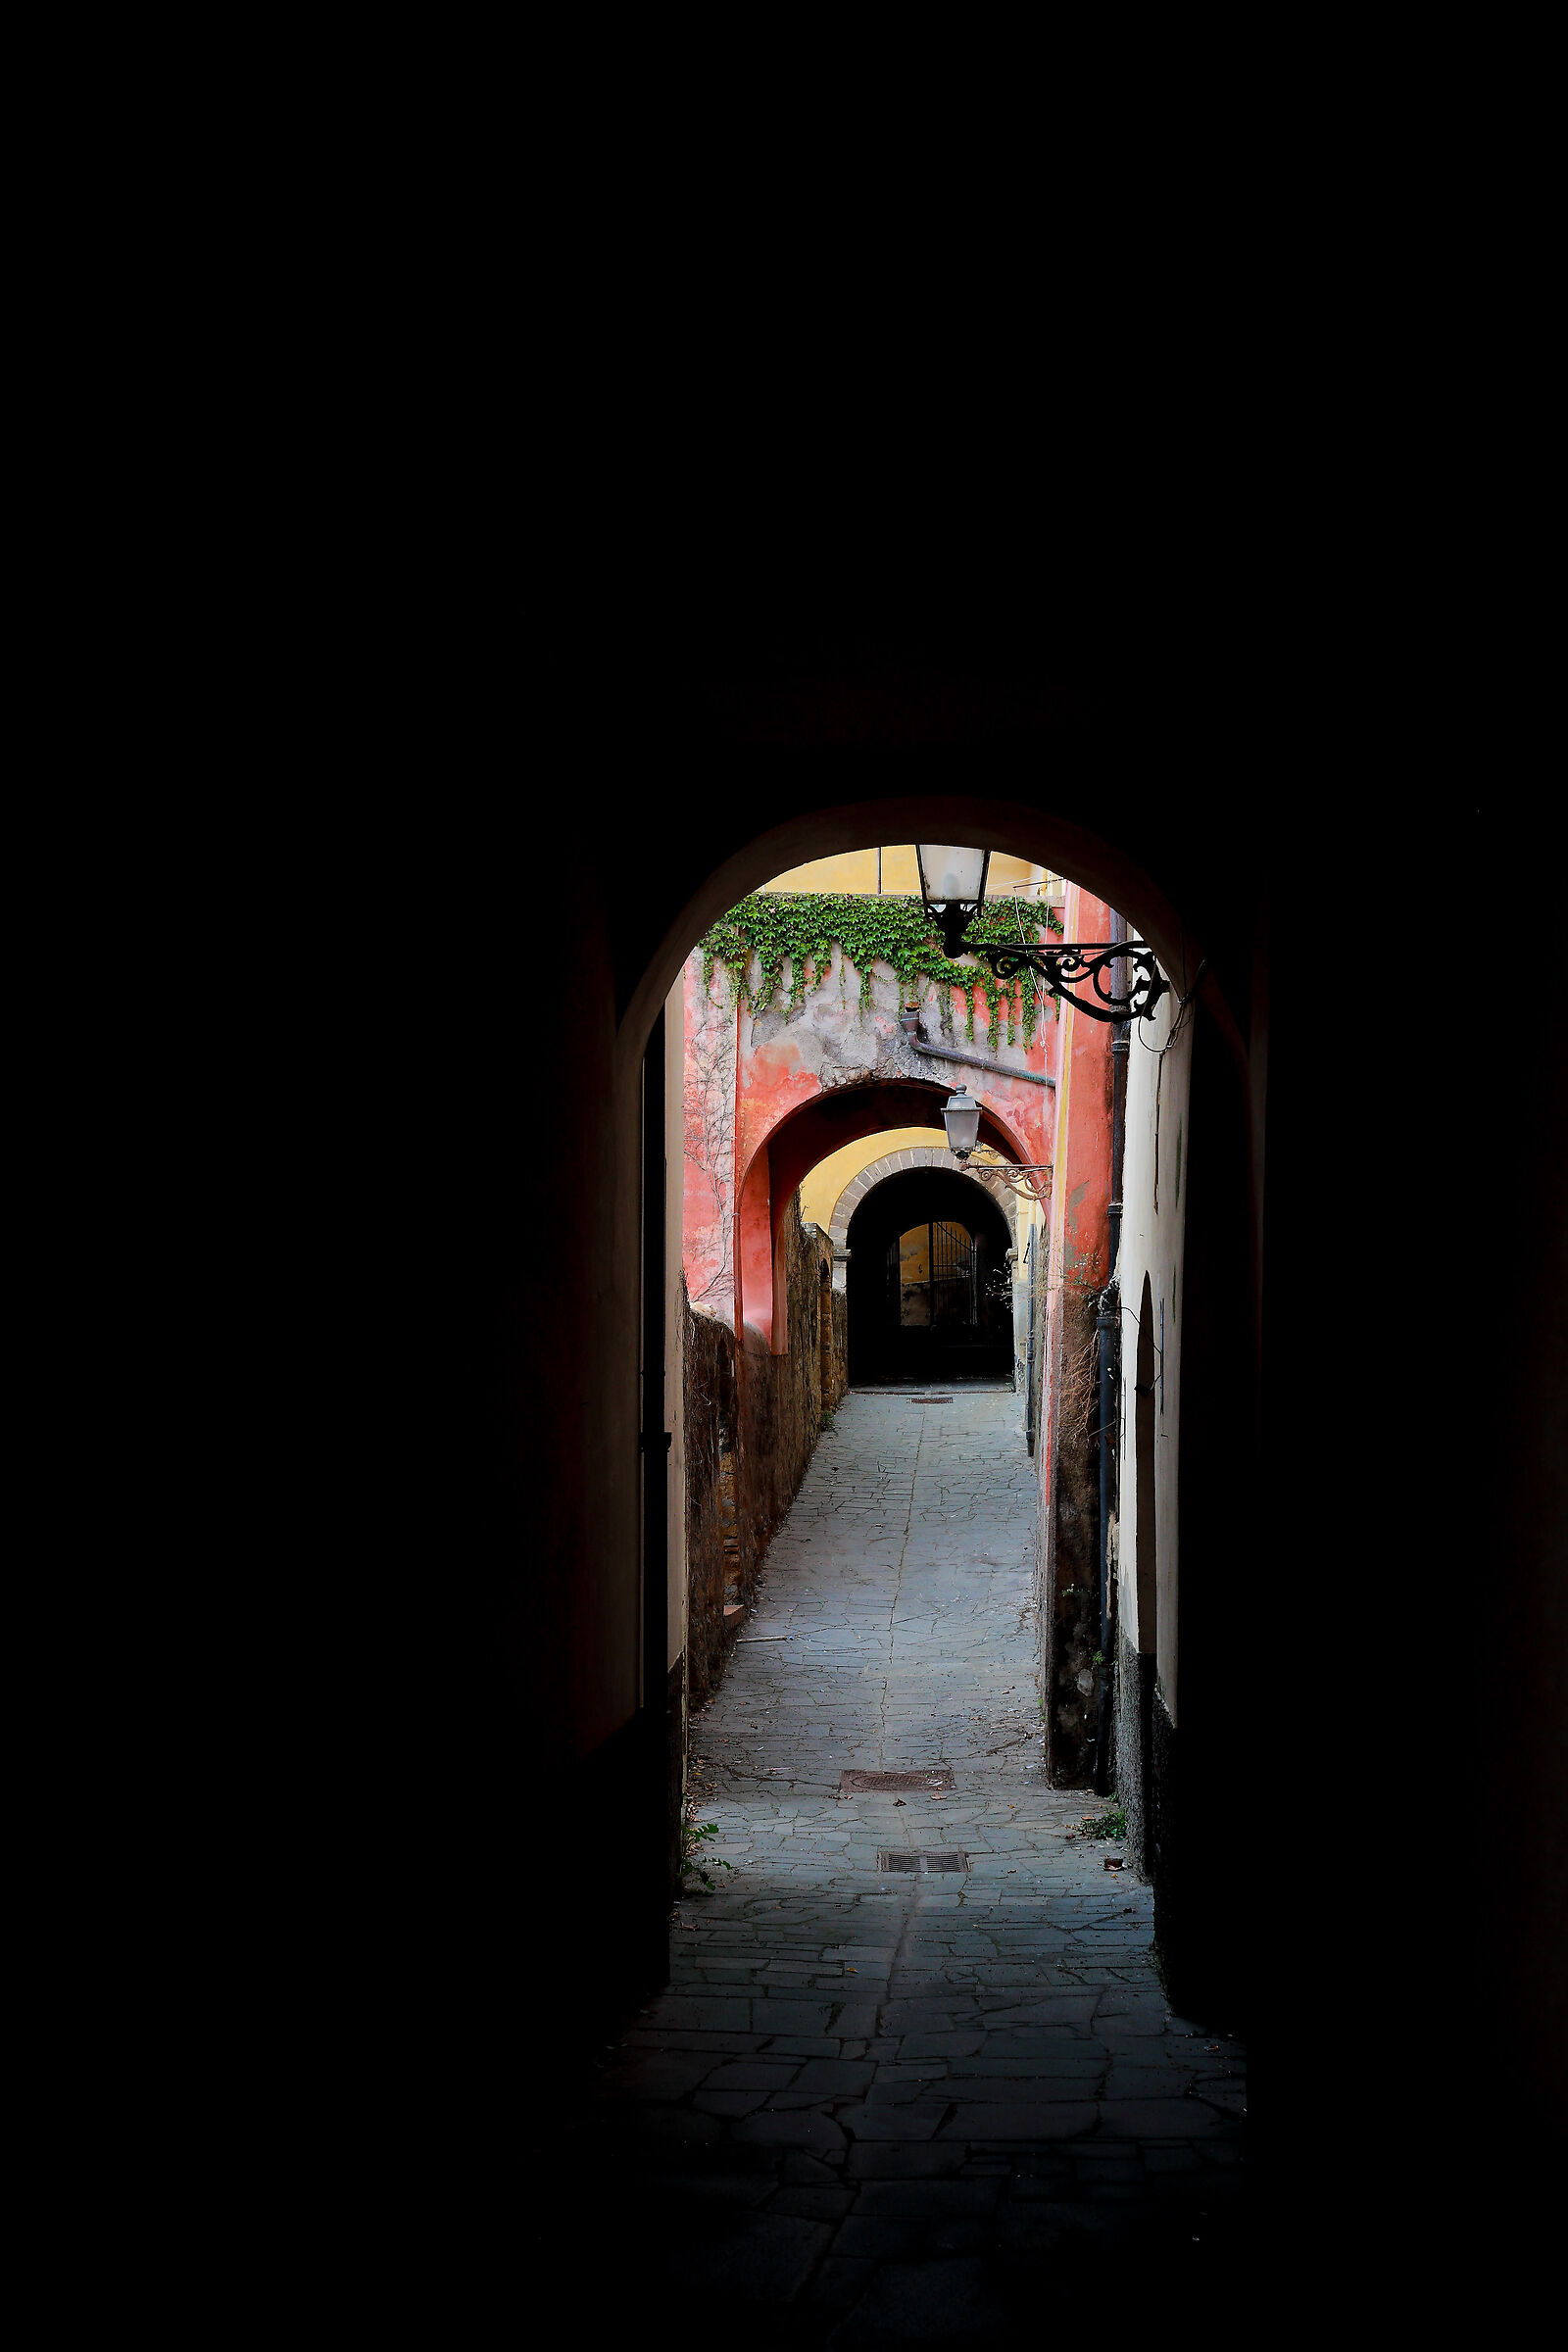 A colorful passage in the "Artisans' Alley"...